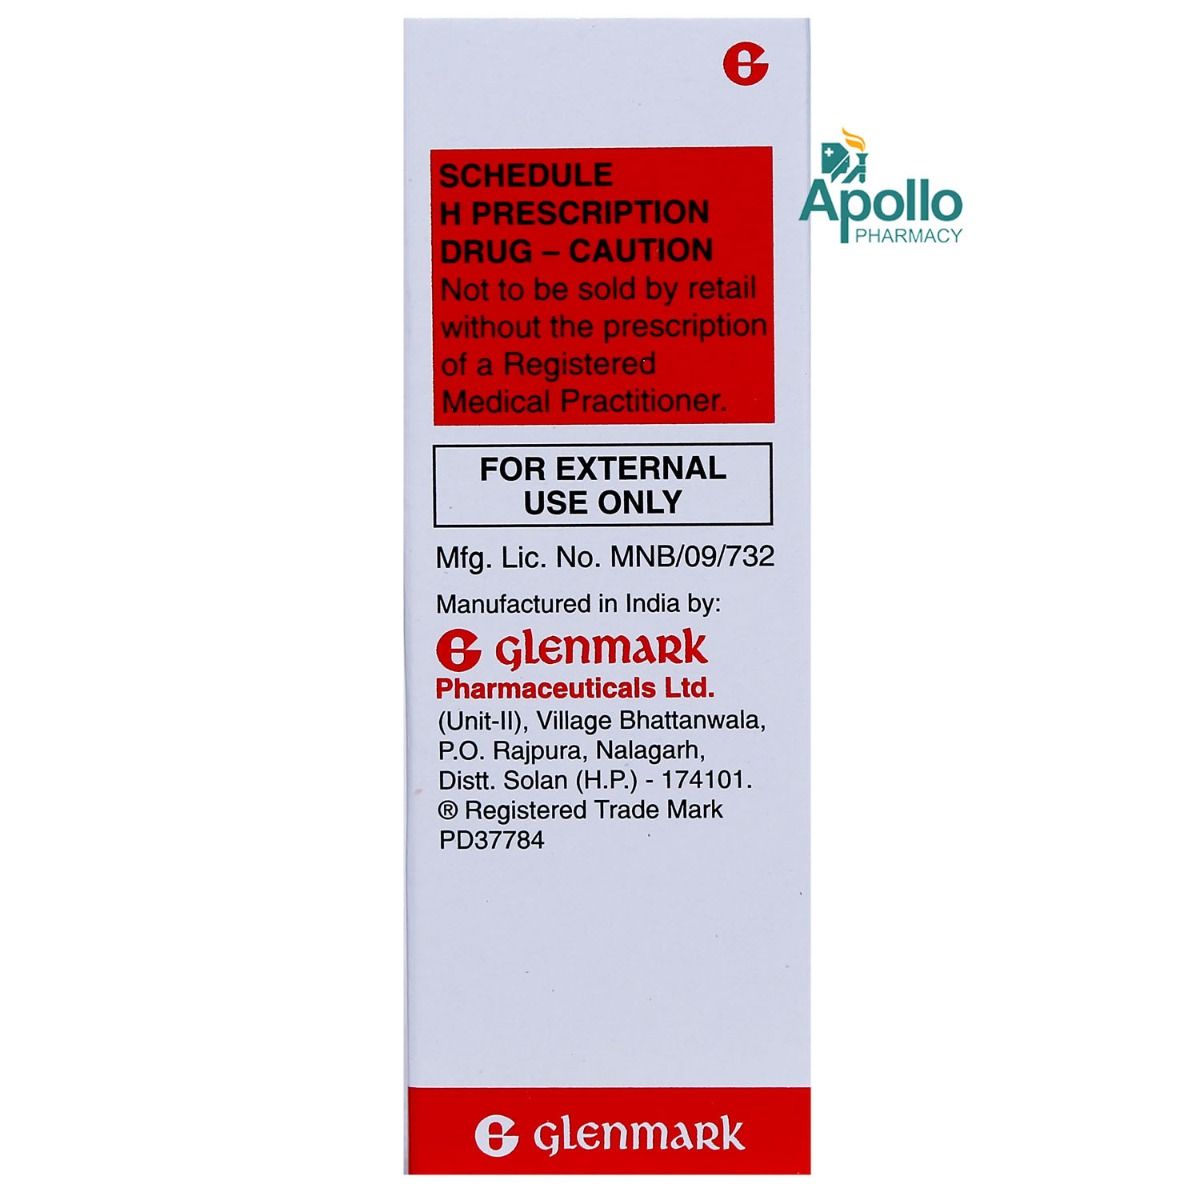 Momate Lotion 30 ml Price, Uses, Side Effects, Composition - Apollo Pharmacy